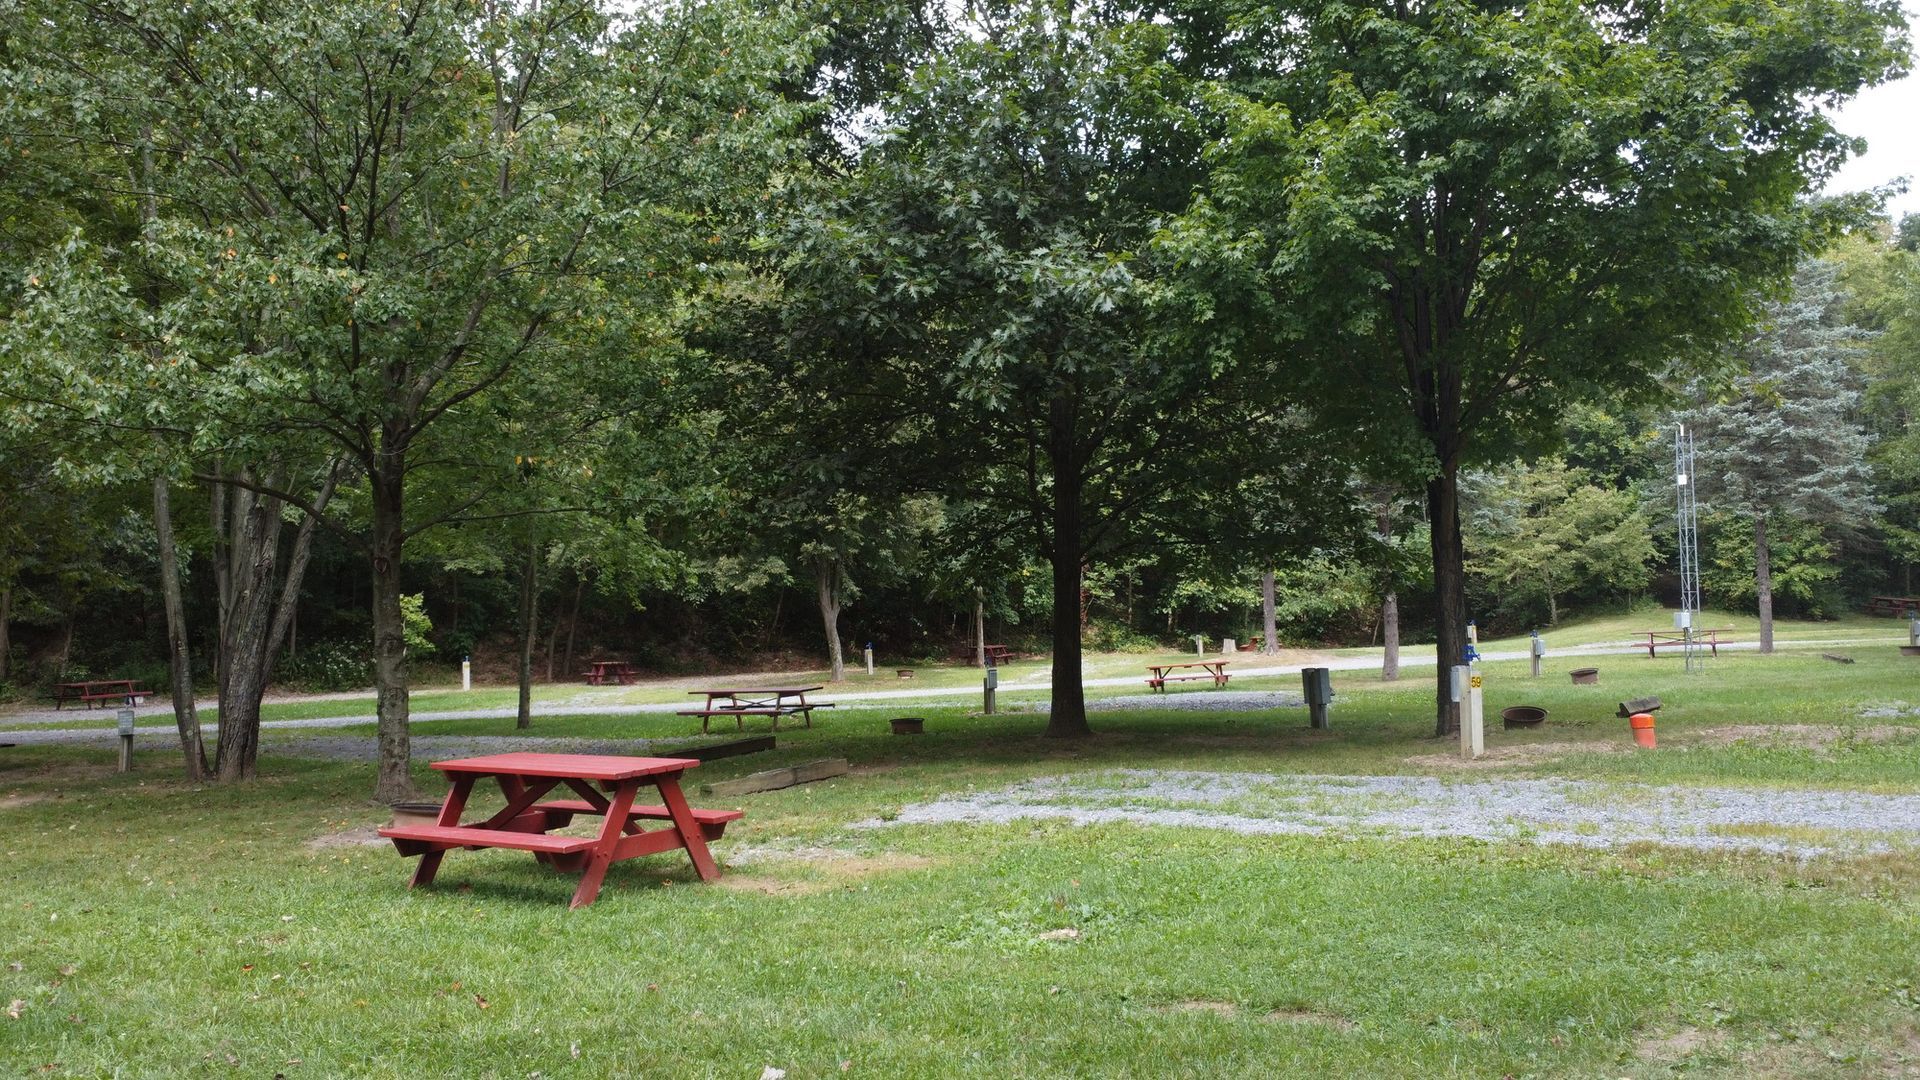 A red picnic table is sitting in the middle of a park surrounded by trees.